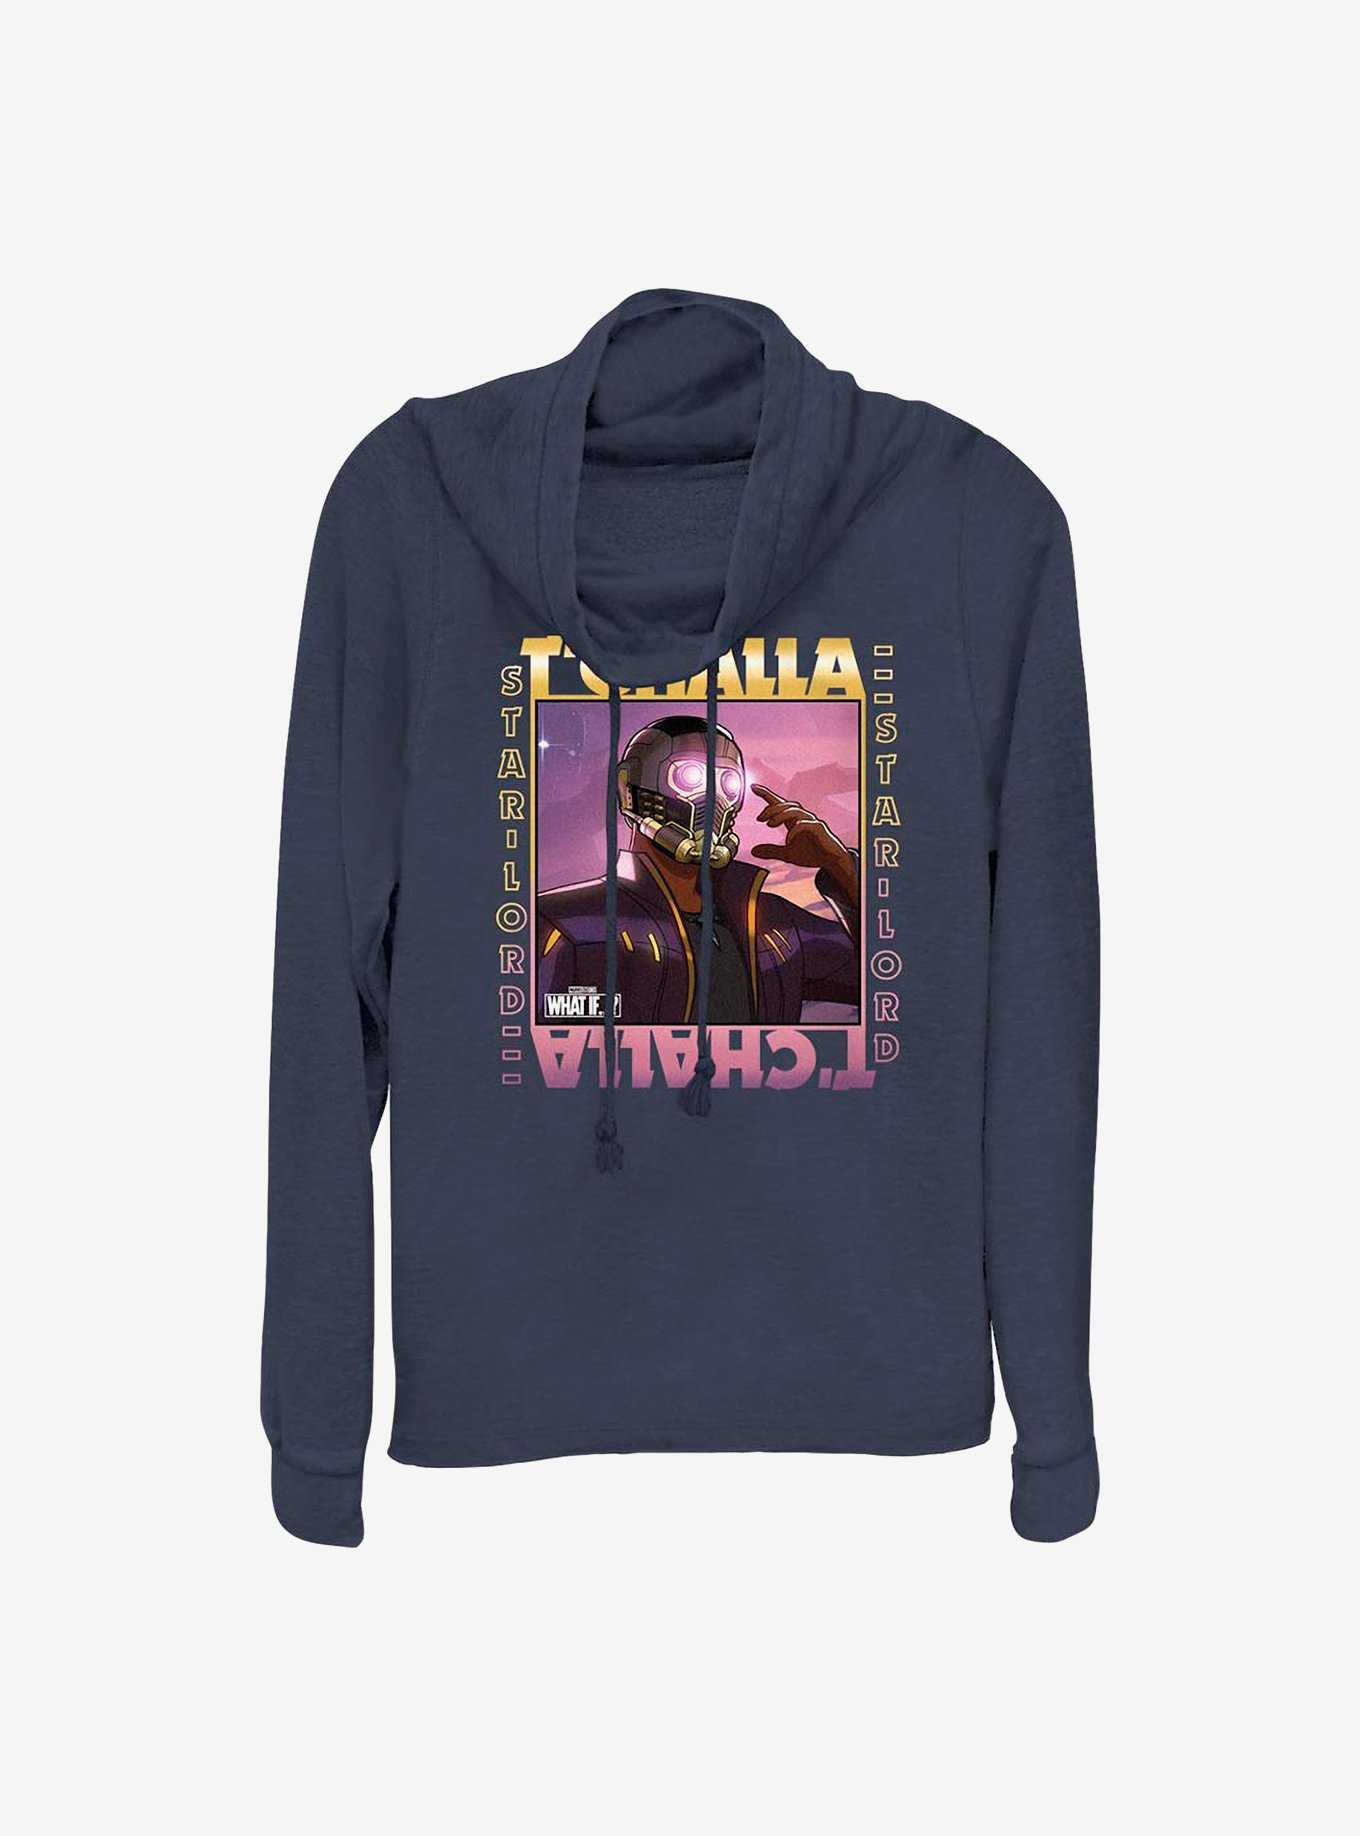 Marvel What If...? T'Challa Was Star-Lord Frame Cowlneck Long-Sleeve Girls Top, , hi-res